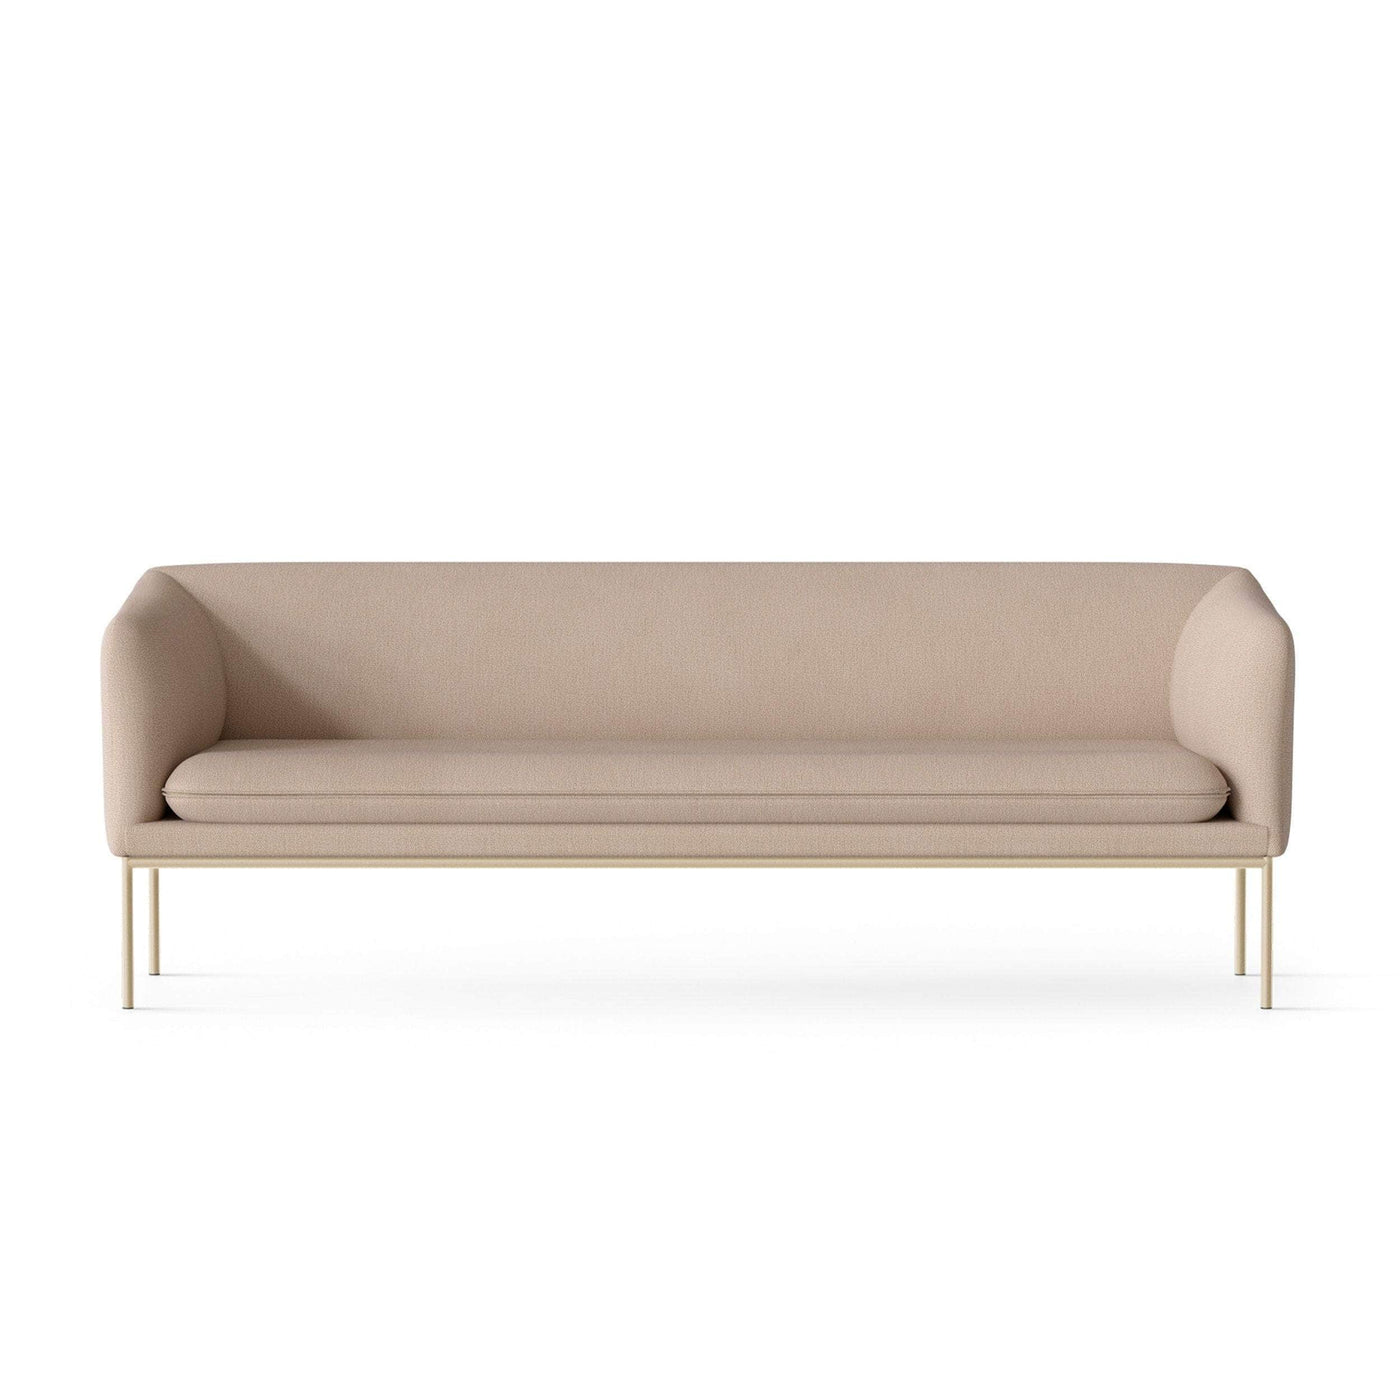 ferm living turn 3 seater sofa with cashmere legs. Made to order from someday designs. 